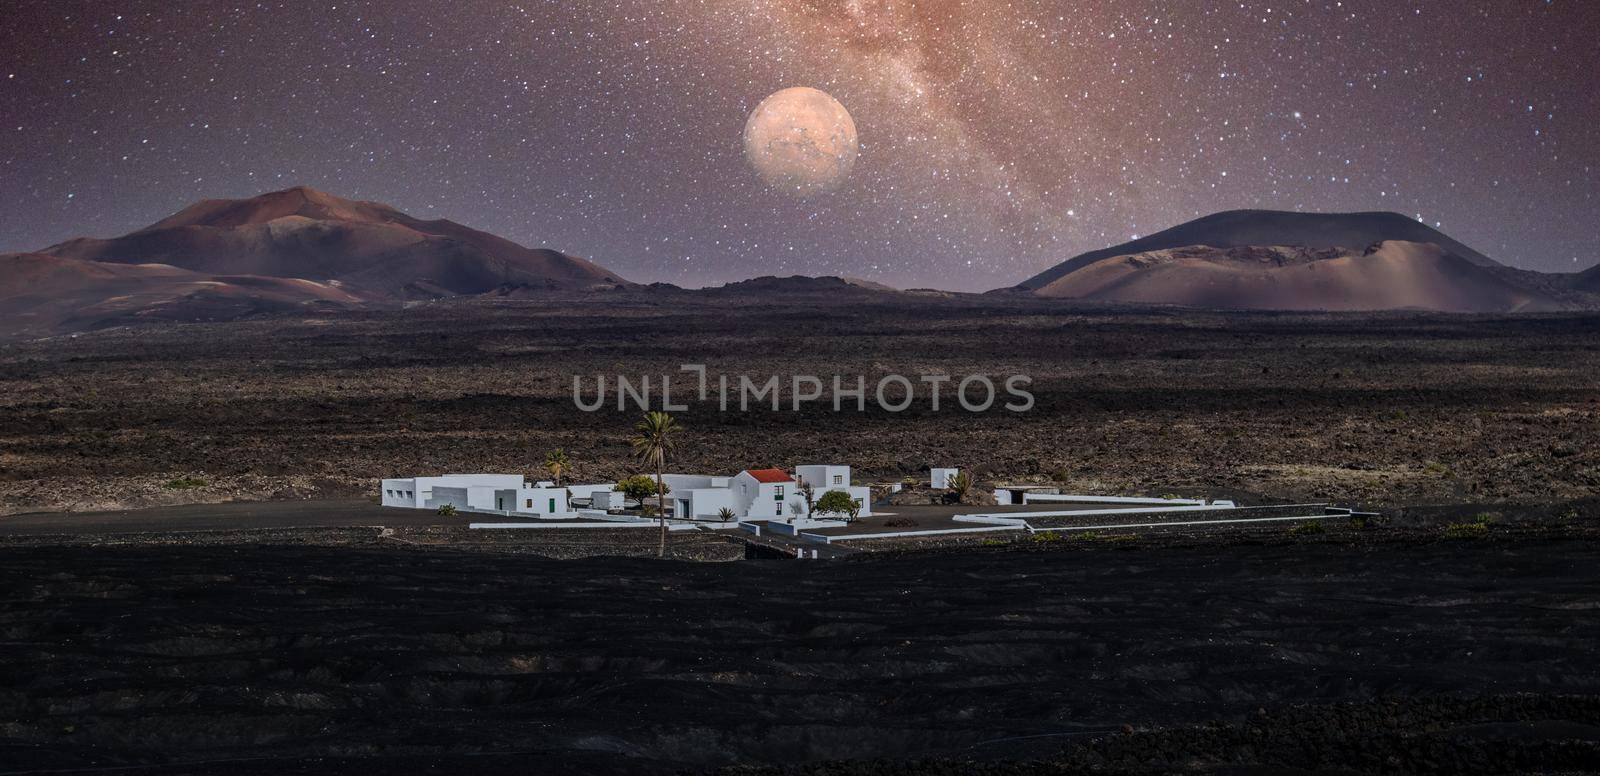 Amazing nocturnal panoramic landscape of volcano craters in Timanfaya national park. Full moon over La Gueria, Lanzarote island, Canary islans, Spain. Artistic night sky picture.